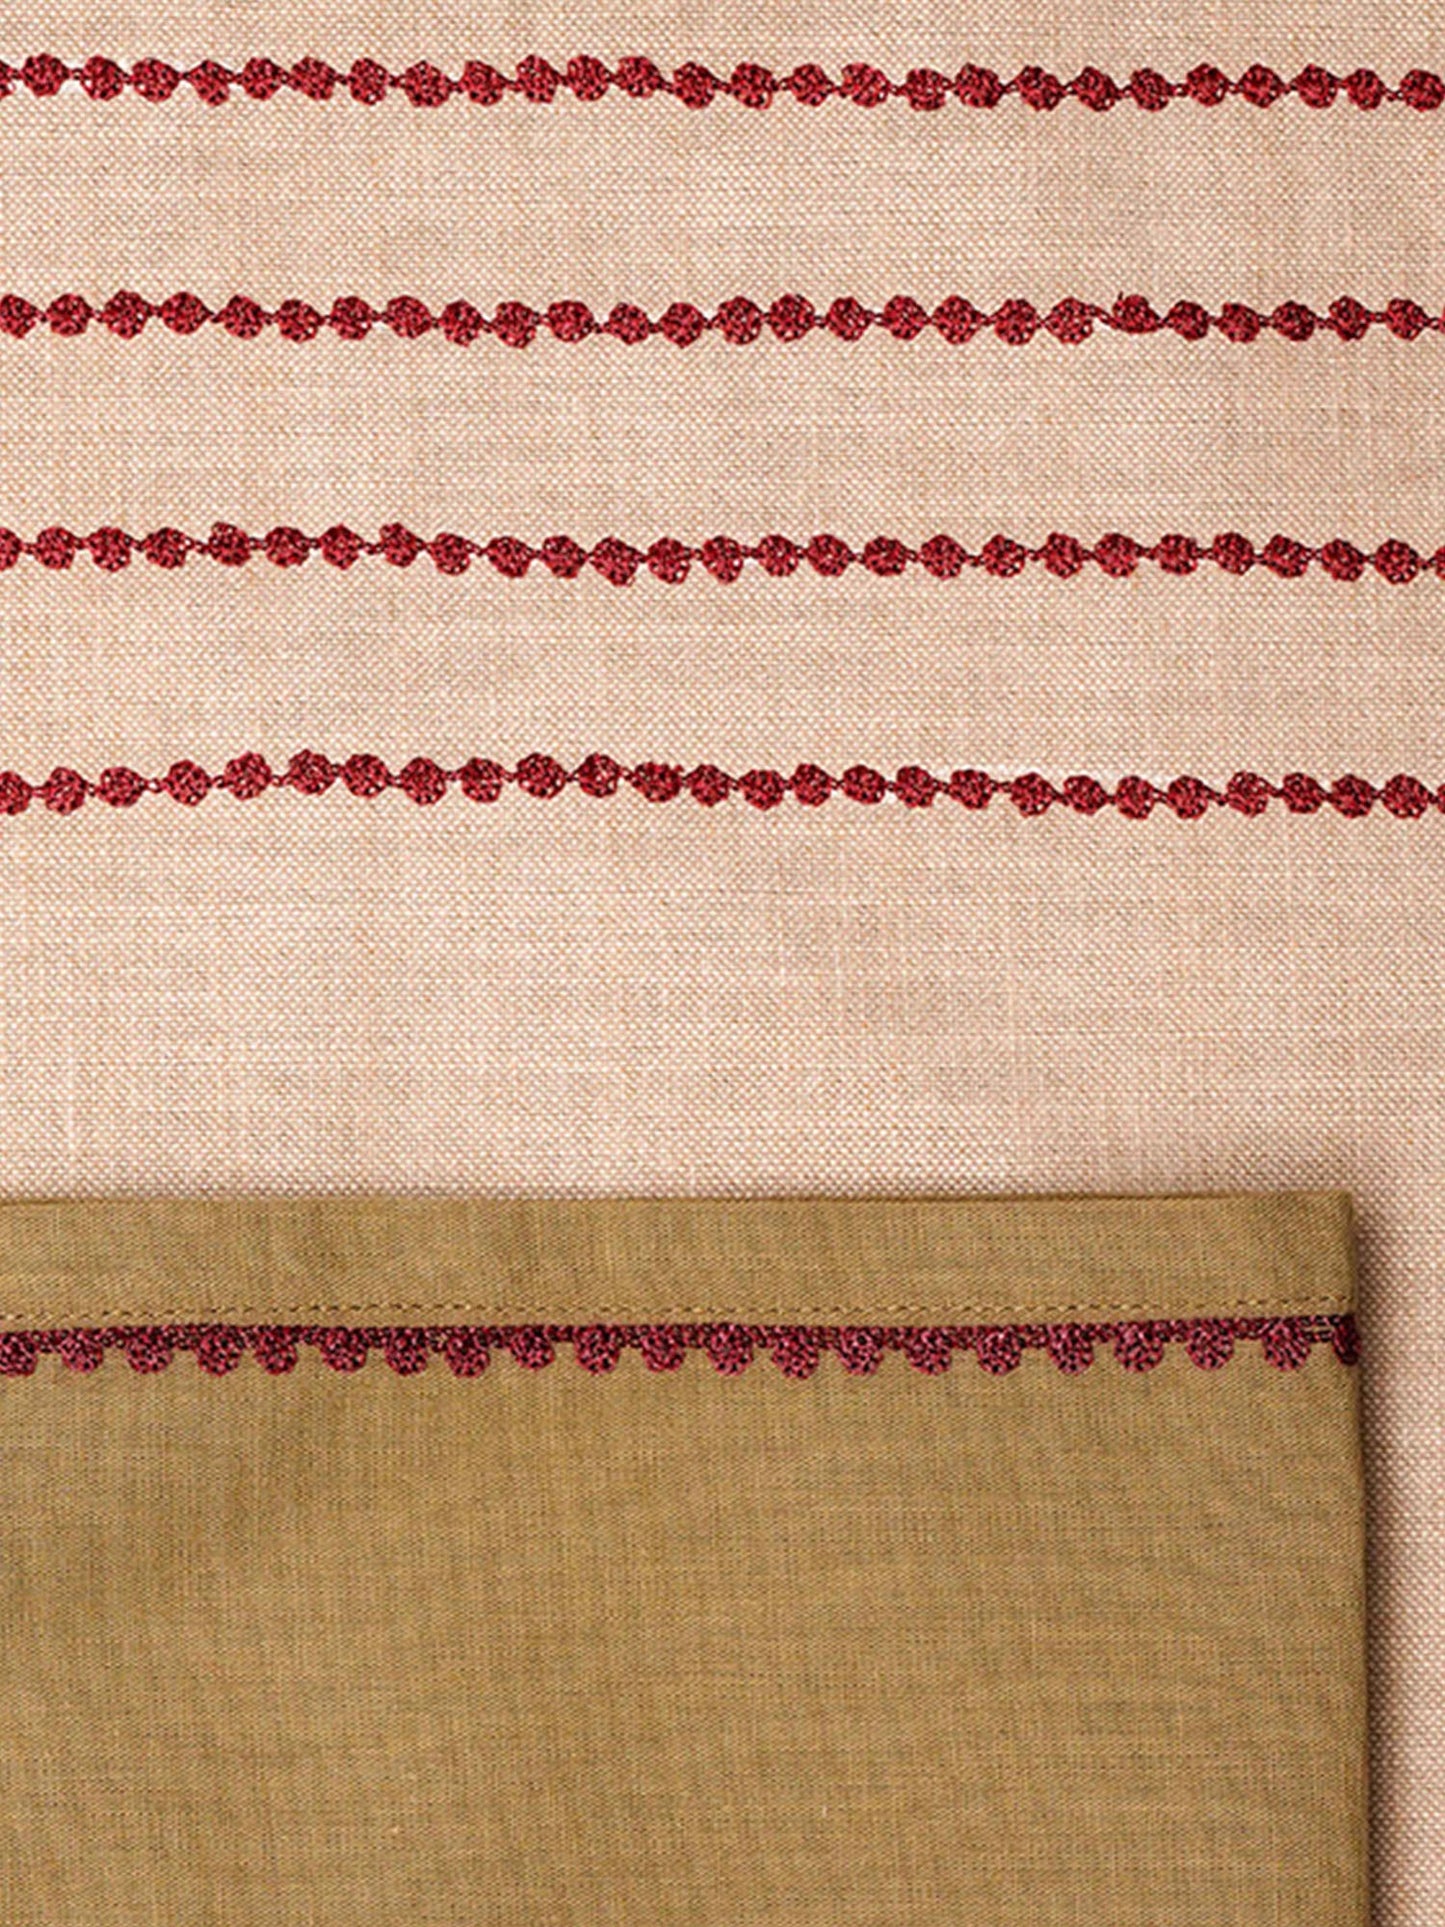 closeup of beige tablemats having red embroidered with flange border and set of cotton napkins beige - 13x19 inch